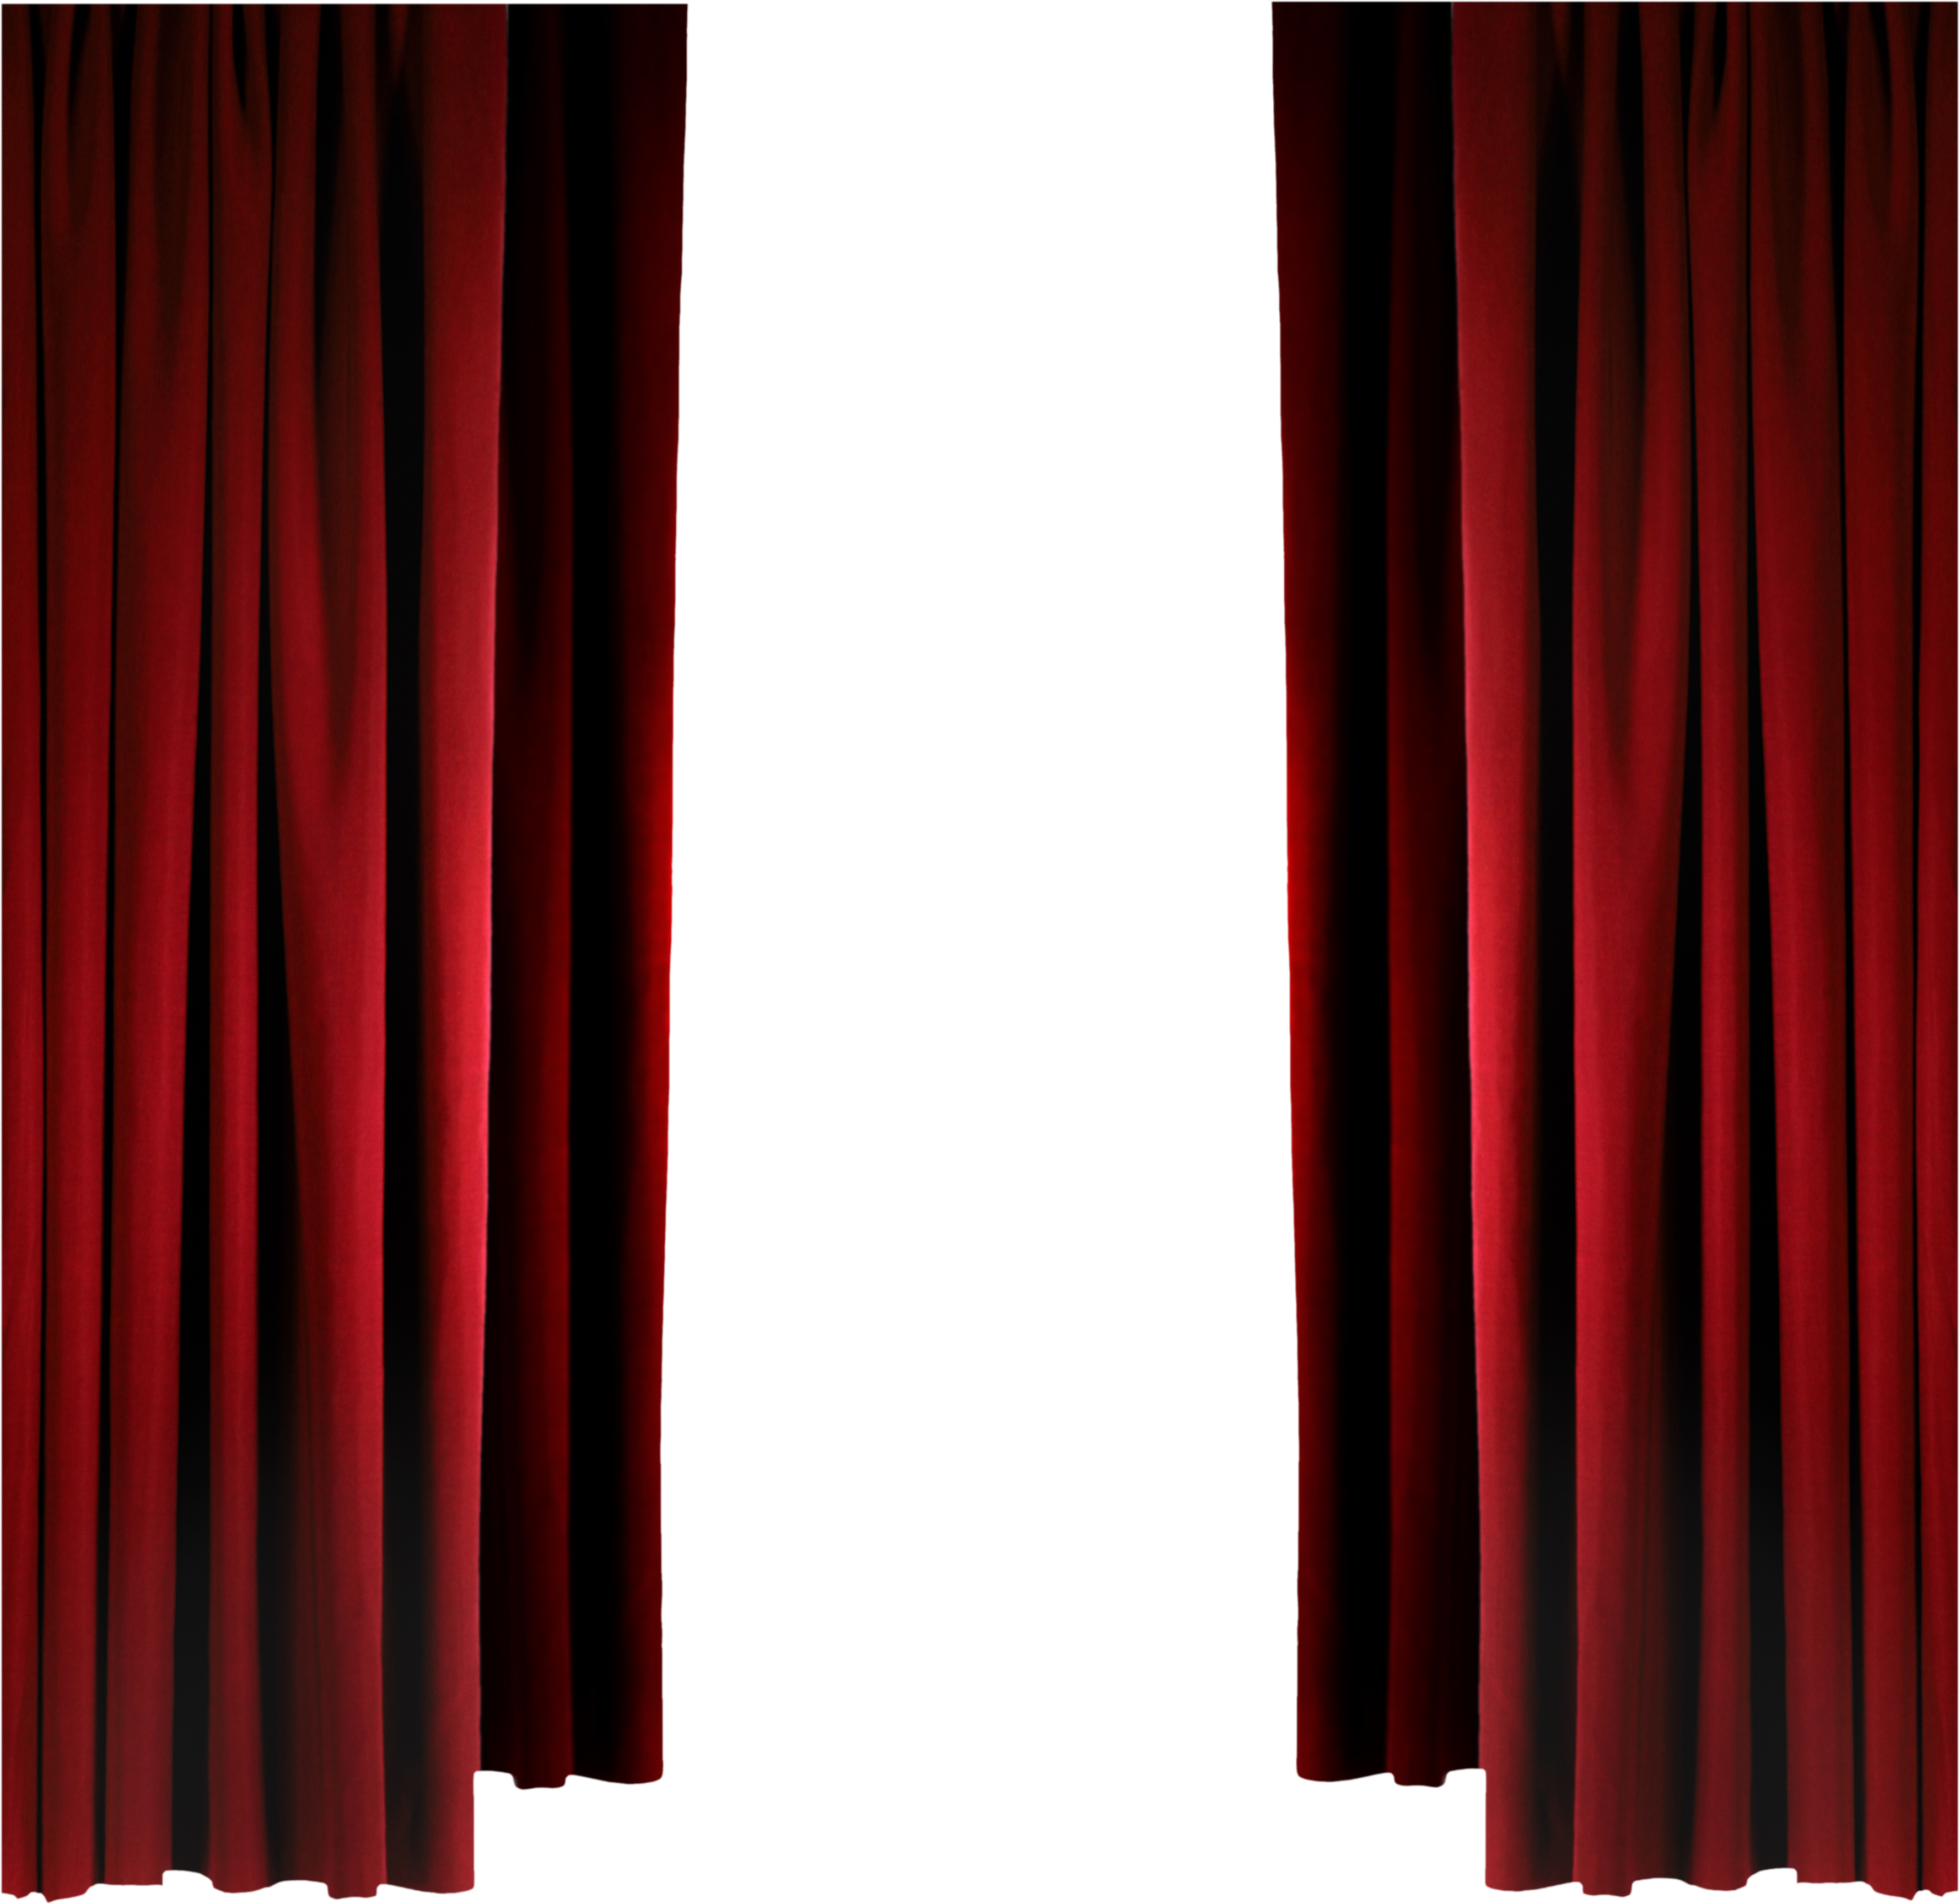 A Red Curtains On A Black Background